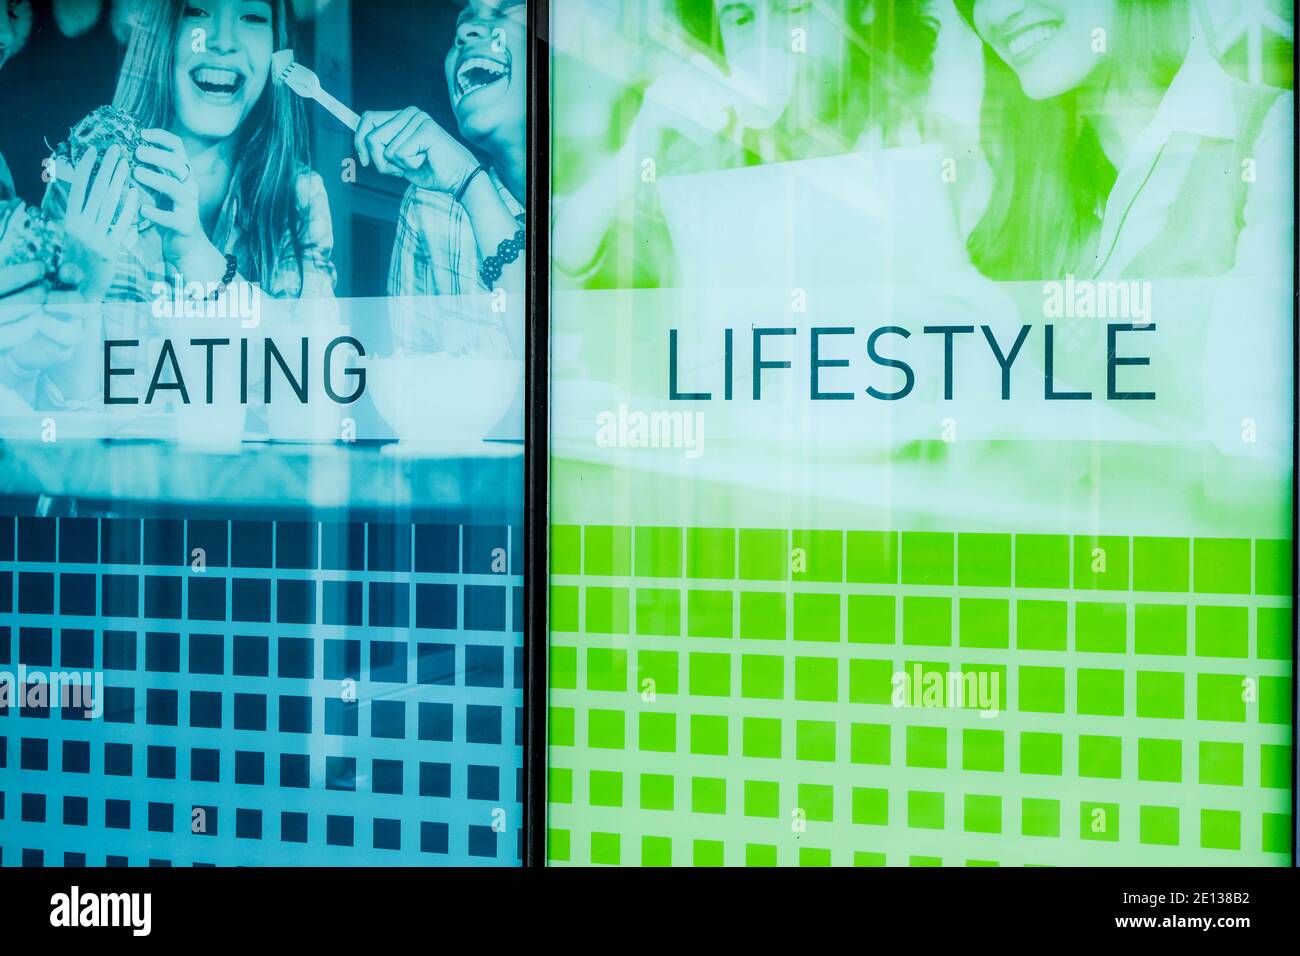 Epsom, London UK, January 03 2021, Modern Window Display Artwork Promoting Lifestyle and Eating In A Shop Front Stock Photo